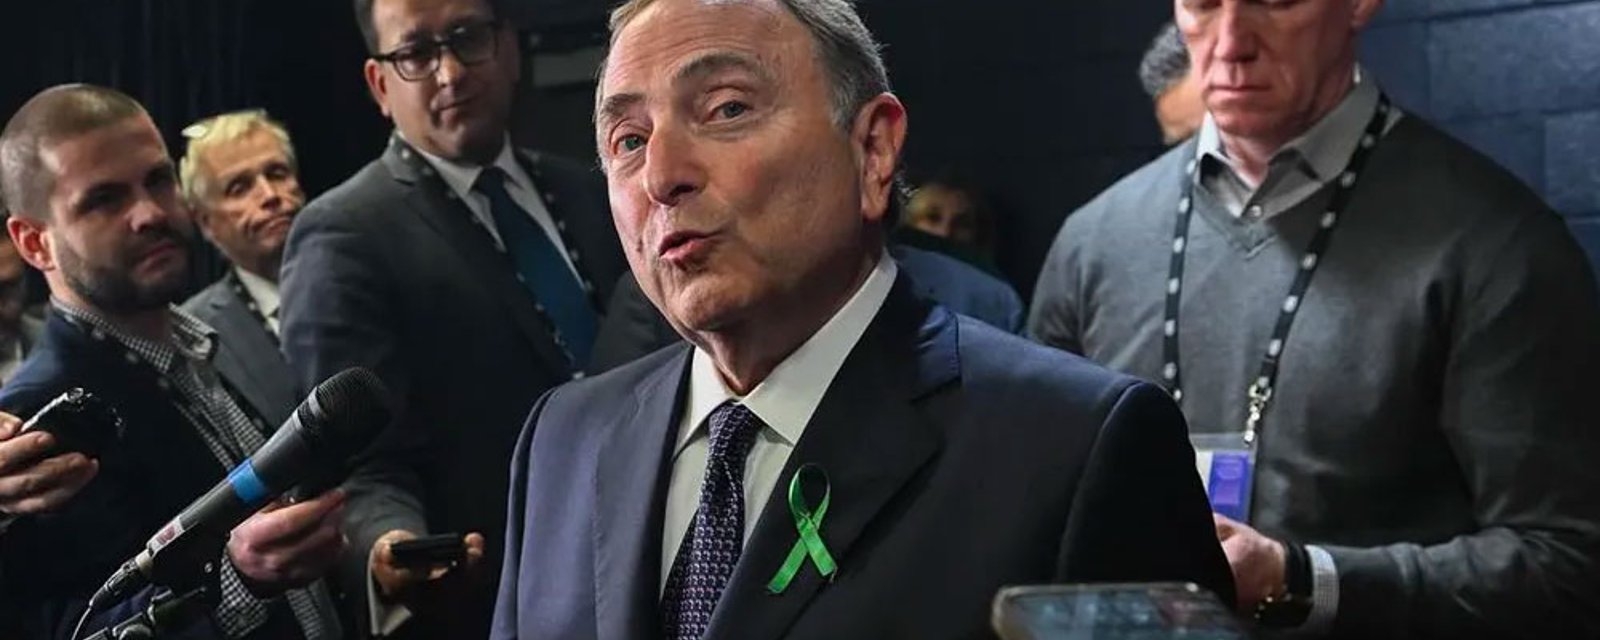 Bettman angers hockey fans across the NHL with comments about tanking for the 1st overall pick